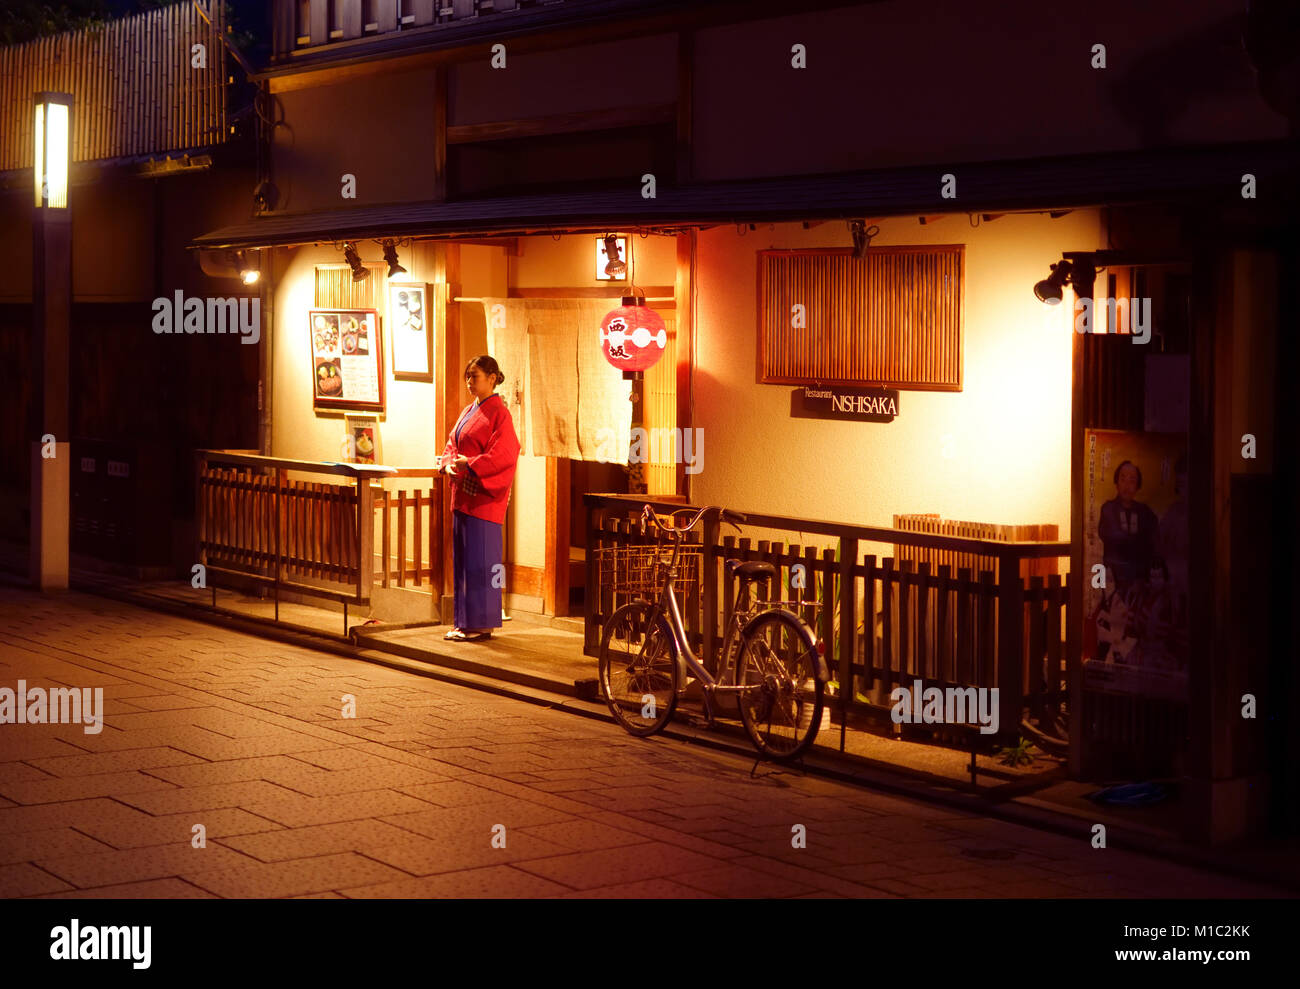 Woman, restaurant clerk welcoming guests by the entrance of a traditional Japanese restaurant Nishisaka at night on Hanamikoji Dori street in Gion dis Stock Photo